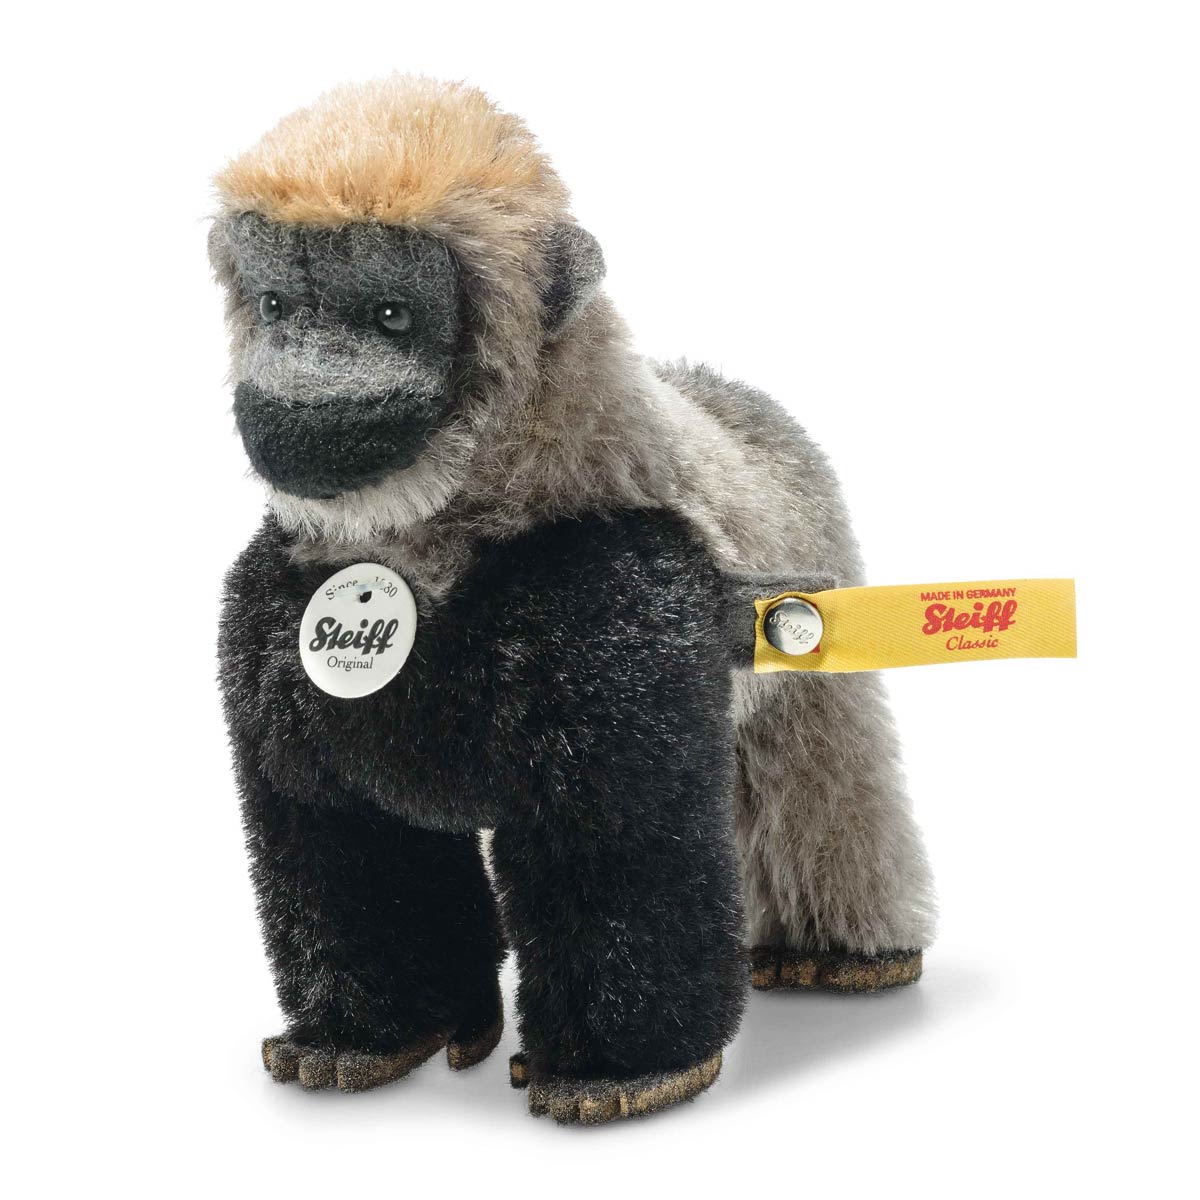 Steiff National Geographic Boogie the Gorilla in Gift Box